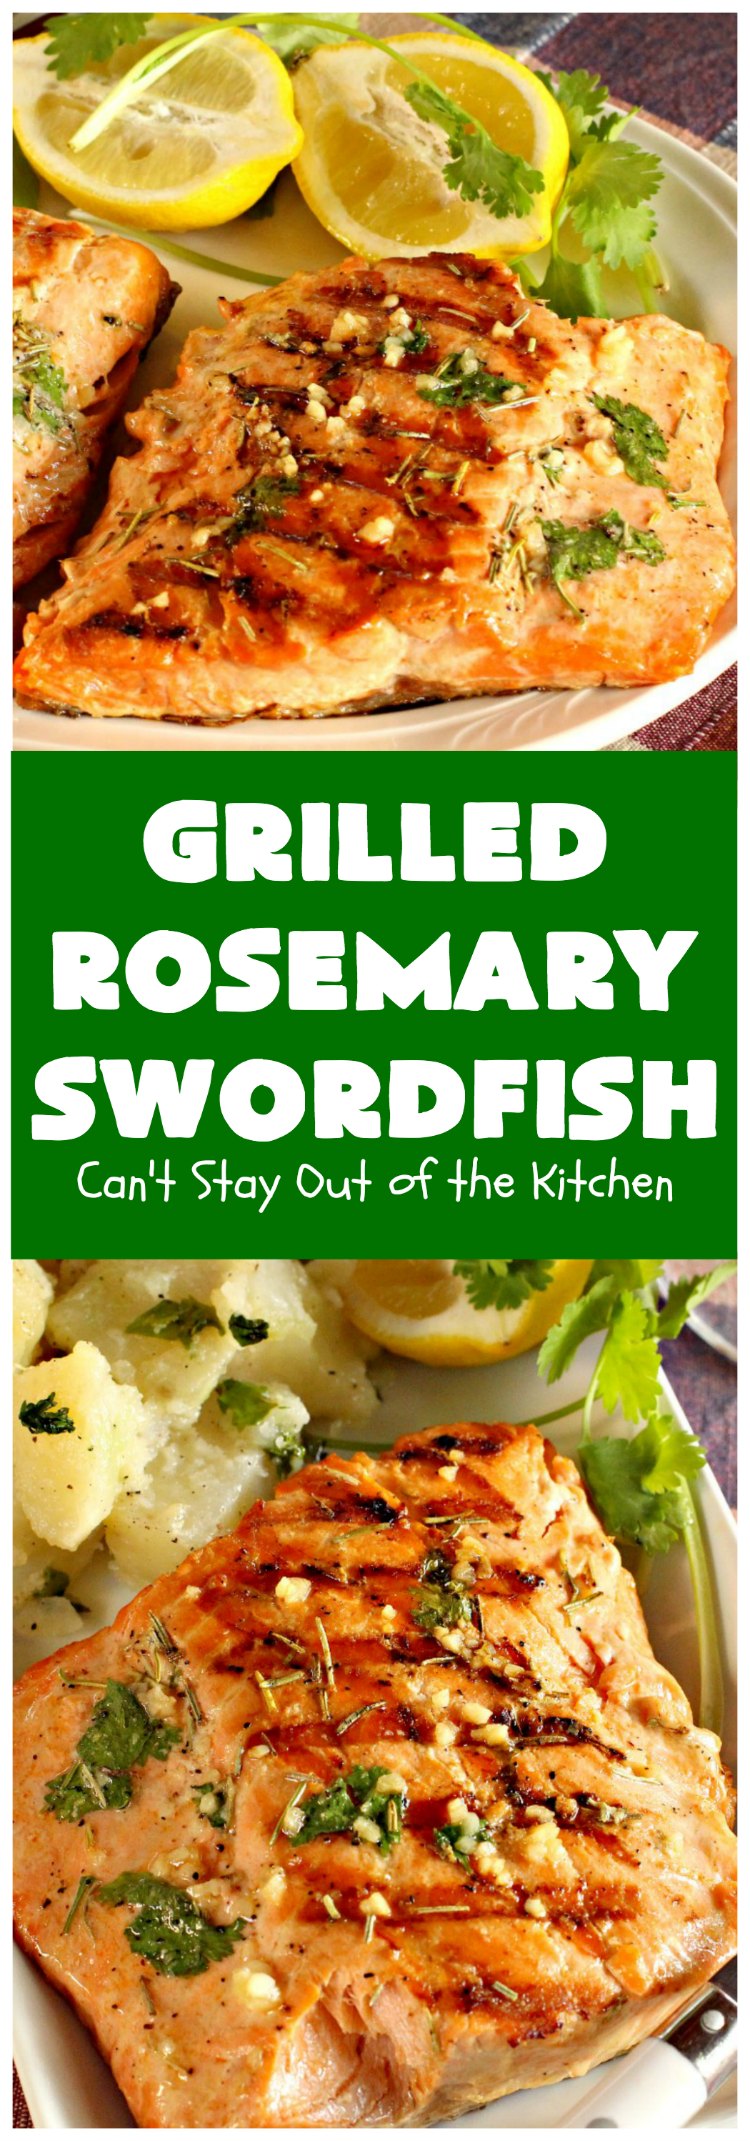 Grilled Rosemary Swordfish | Can't Stay Out of the Kitchen | this fantastic #Swordfish #recipe uses only a handful of ingredients but is absolutely sumptuous. It's a great way to eat #healthy but enjoy flavorful, tasty food at the same time. Terrific for weeknight dinners when you're short on time. #seafood #GlutenFree #fish #LowCalorie #GrilledRosemarySwordfish #CleanEating